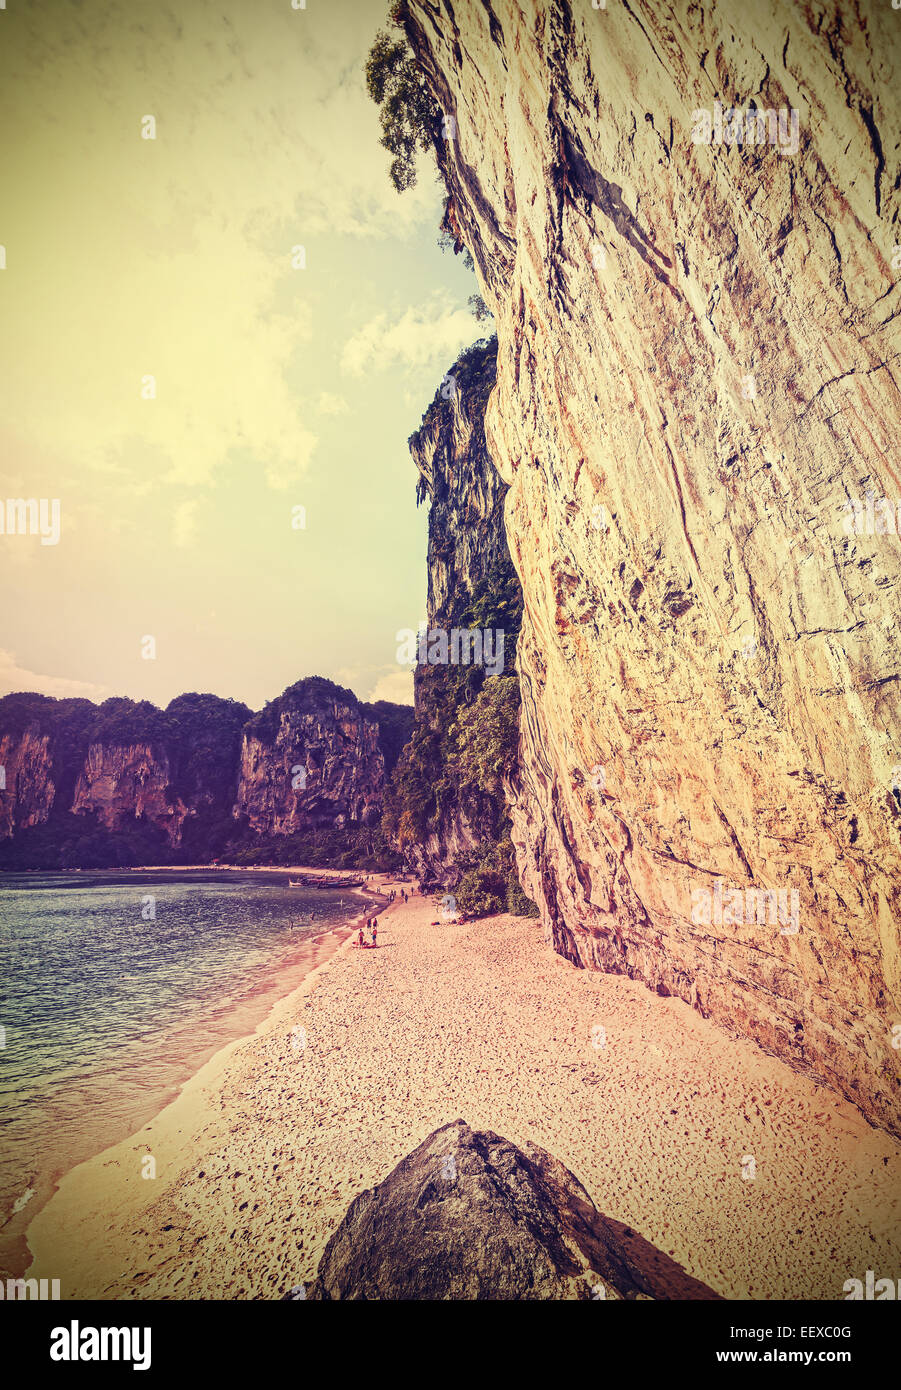 Retro vintage filtered picture of a cliff beach. Stock Photo